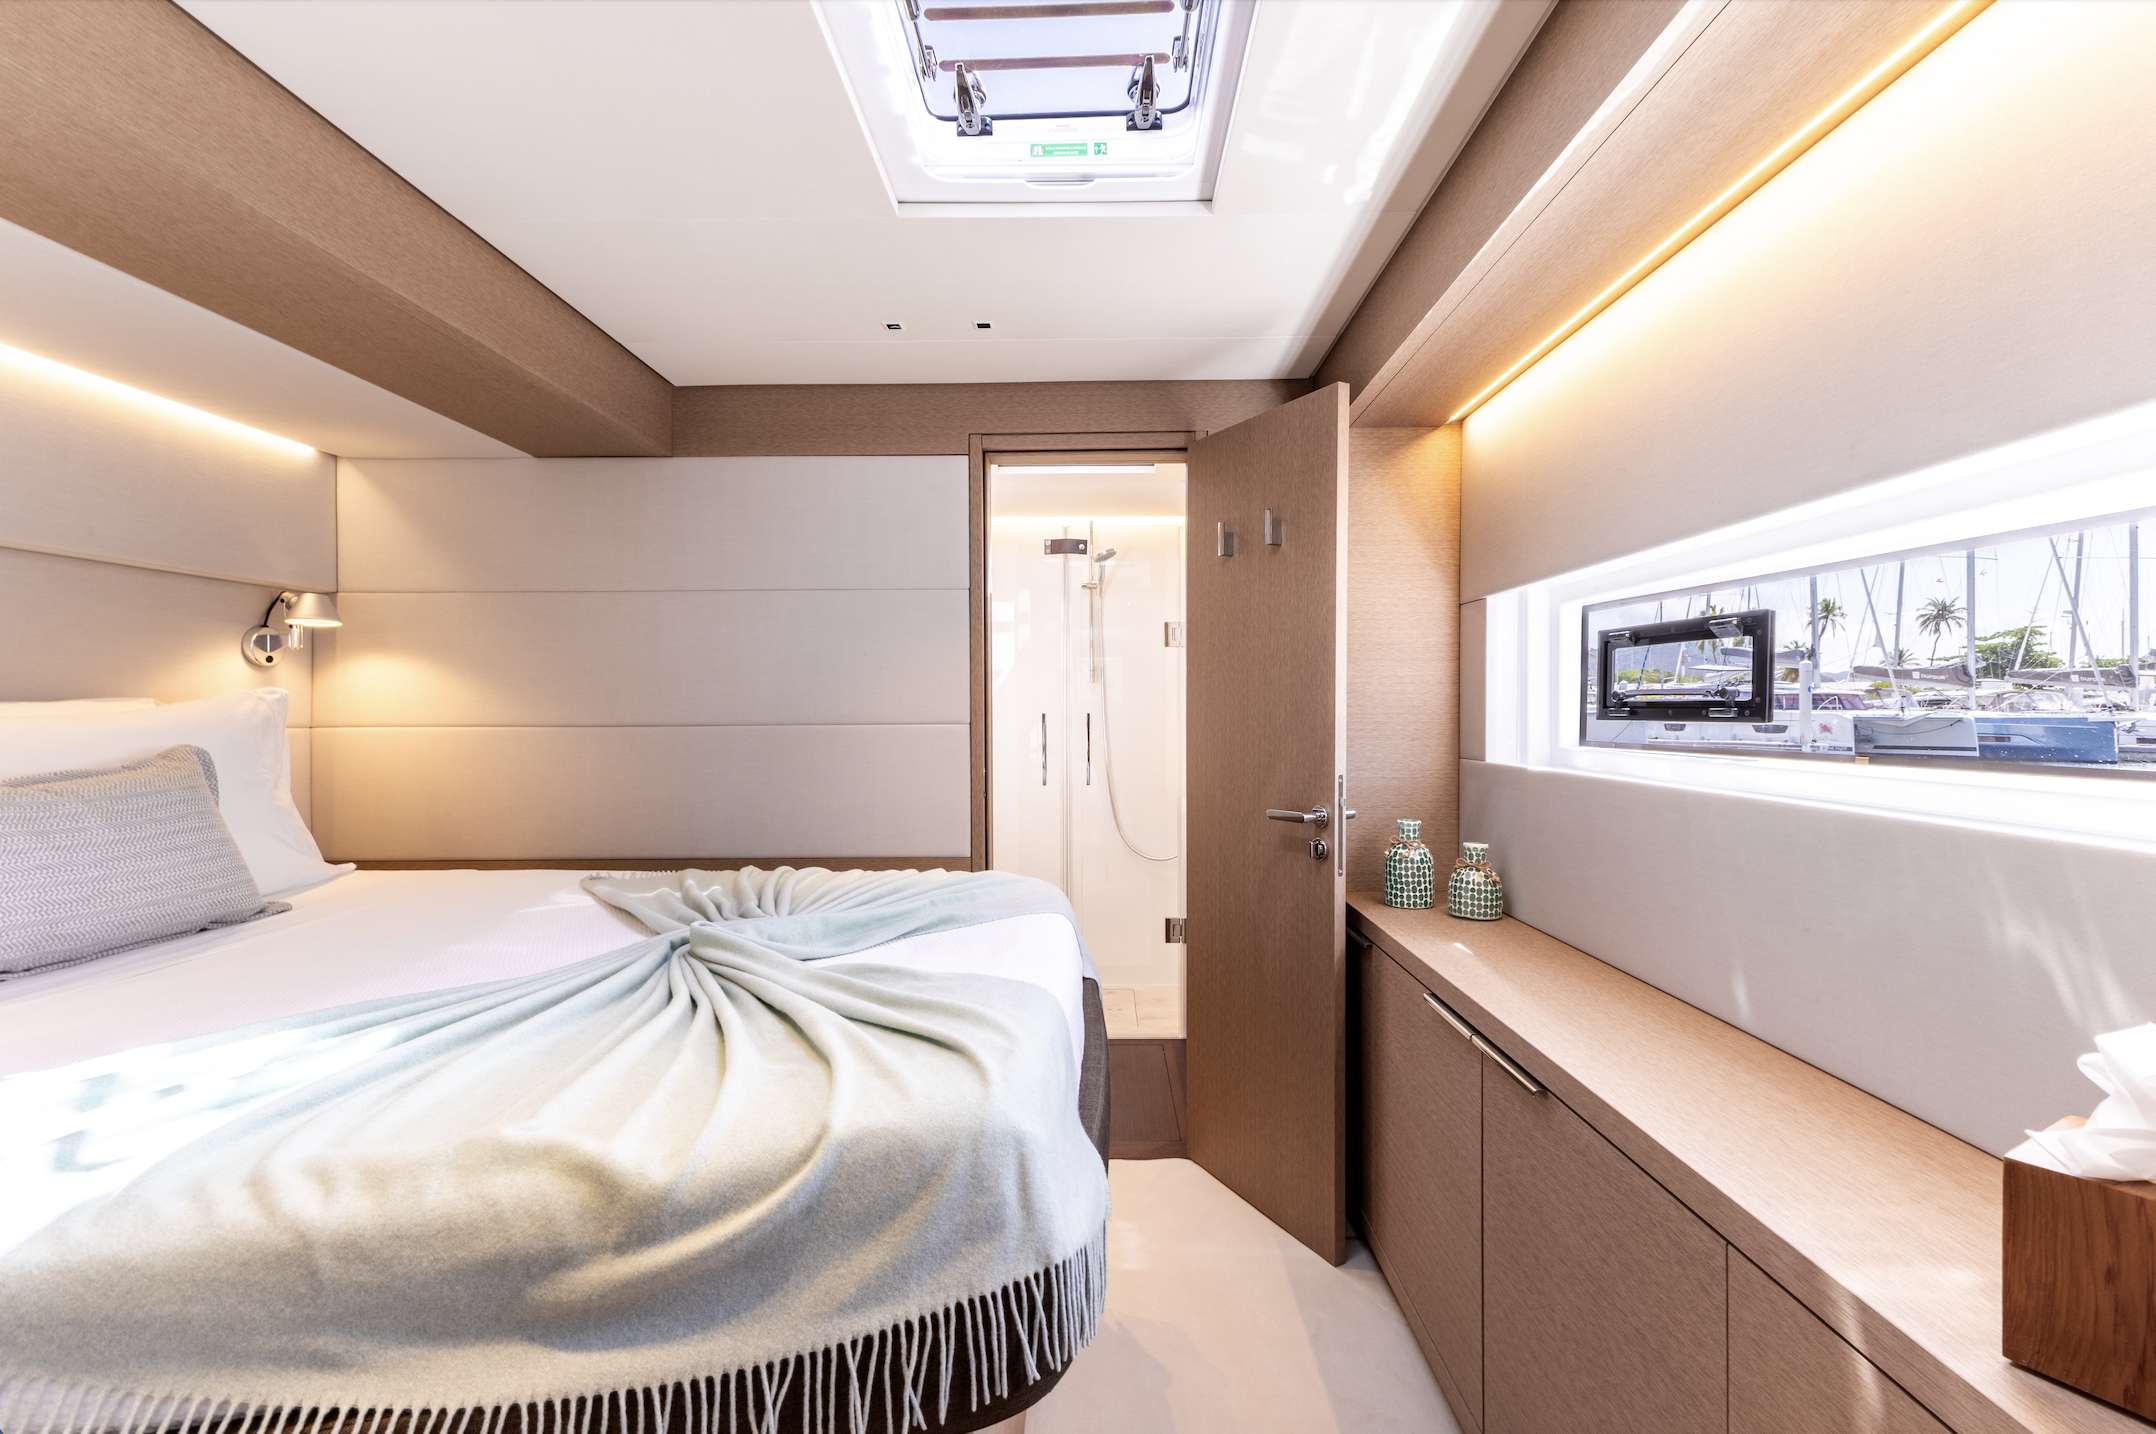 Aura Catamaran stateroom with bright lighting, and modern touches